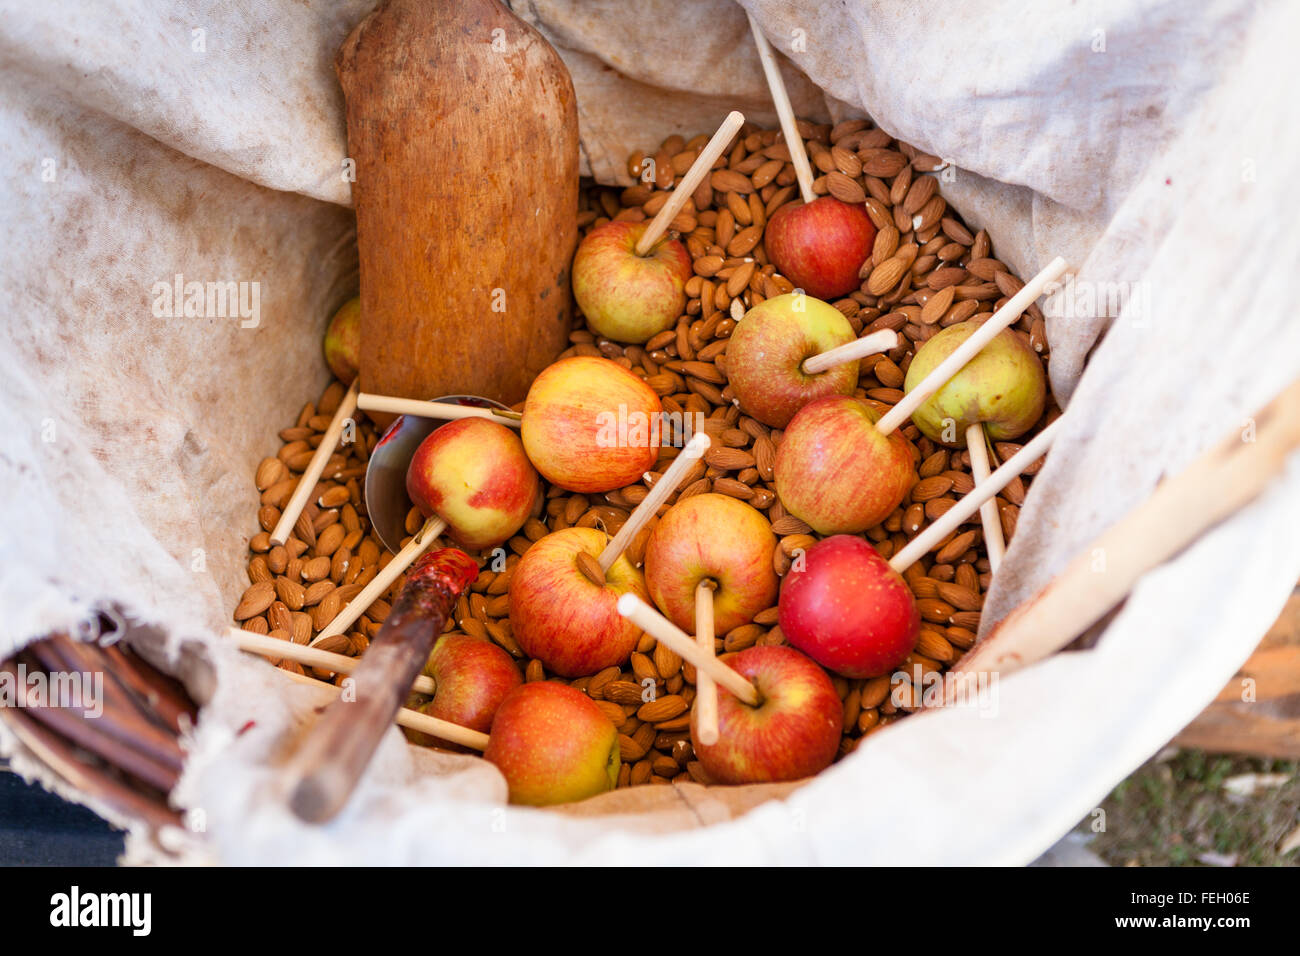 Candy apples waiting to be prepared Stock Photo